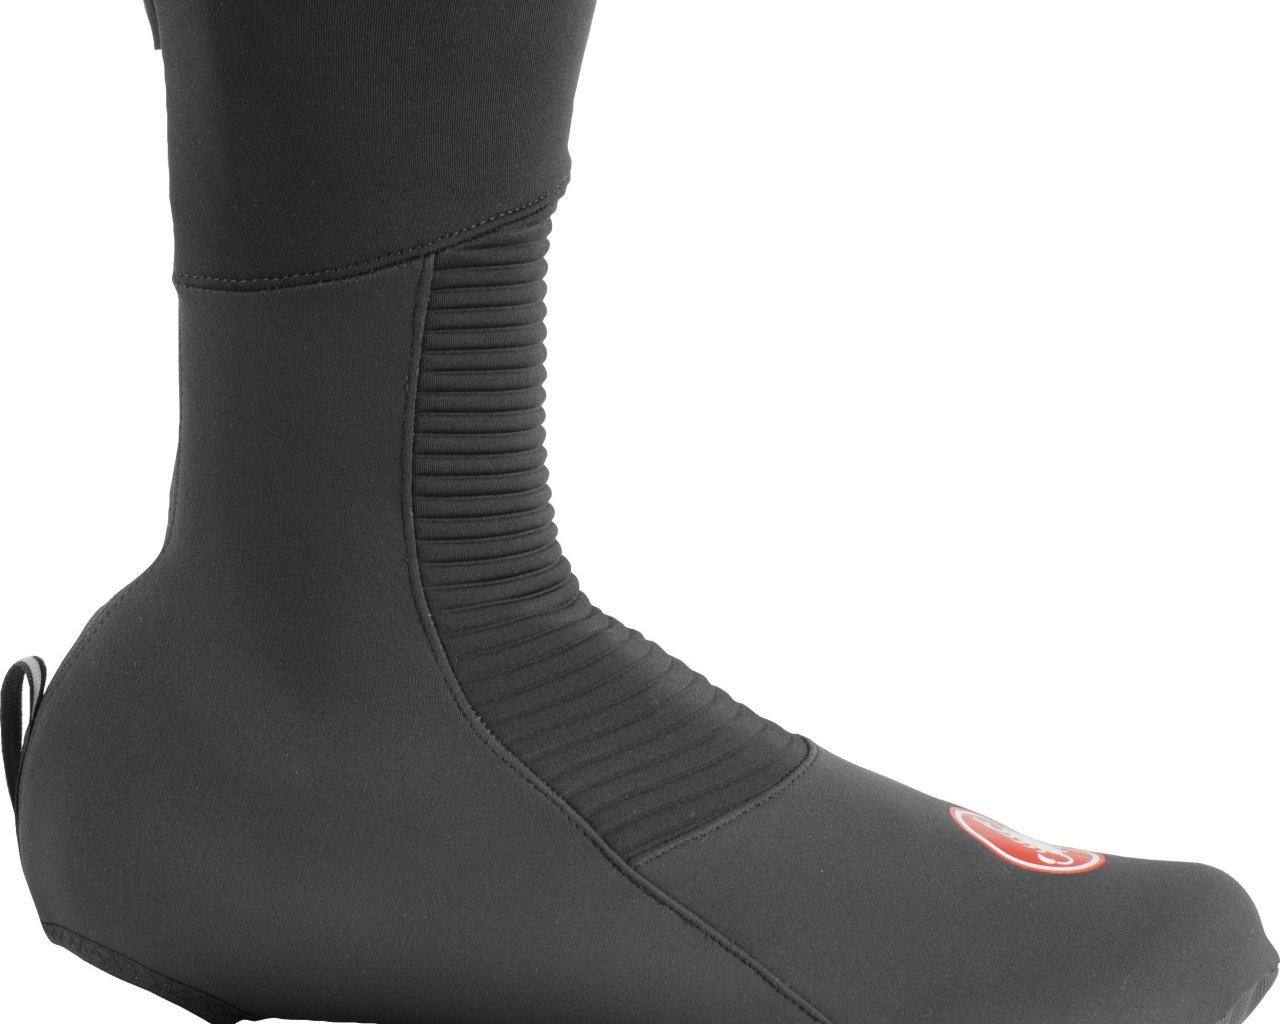 Castelli Entrata Shoecover - AW23 | Merlin Cycles